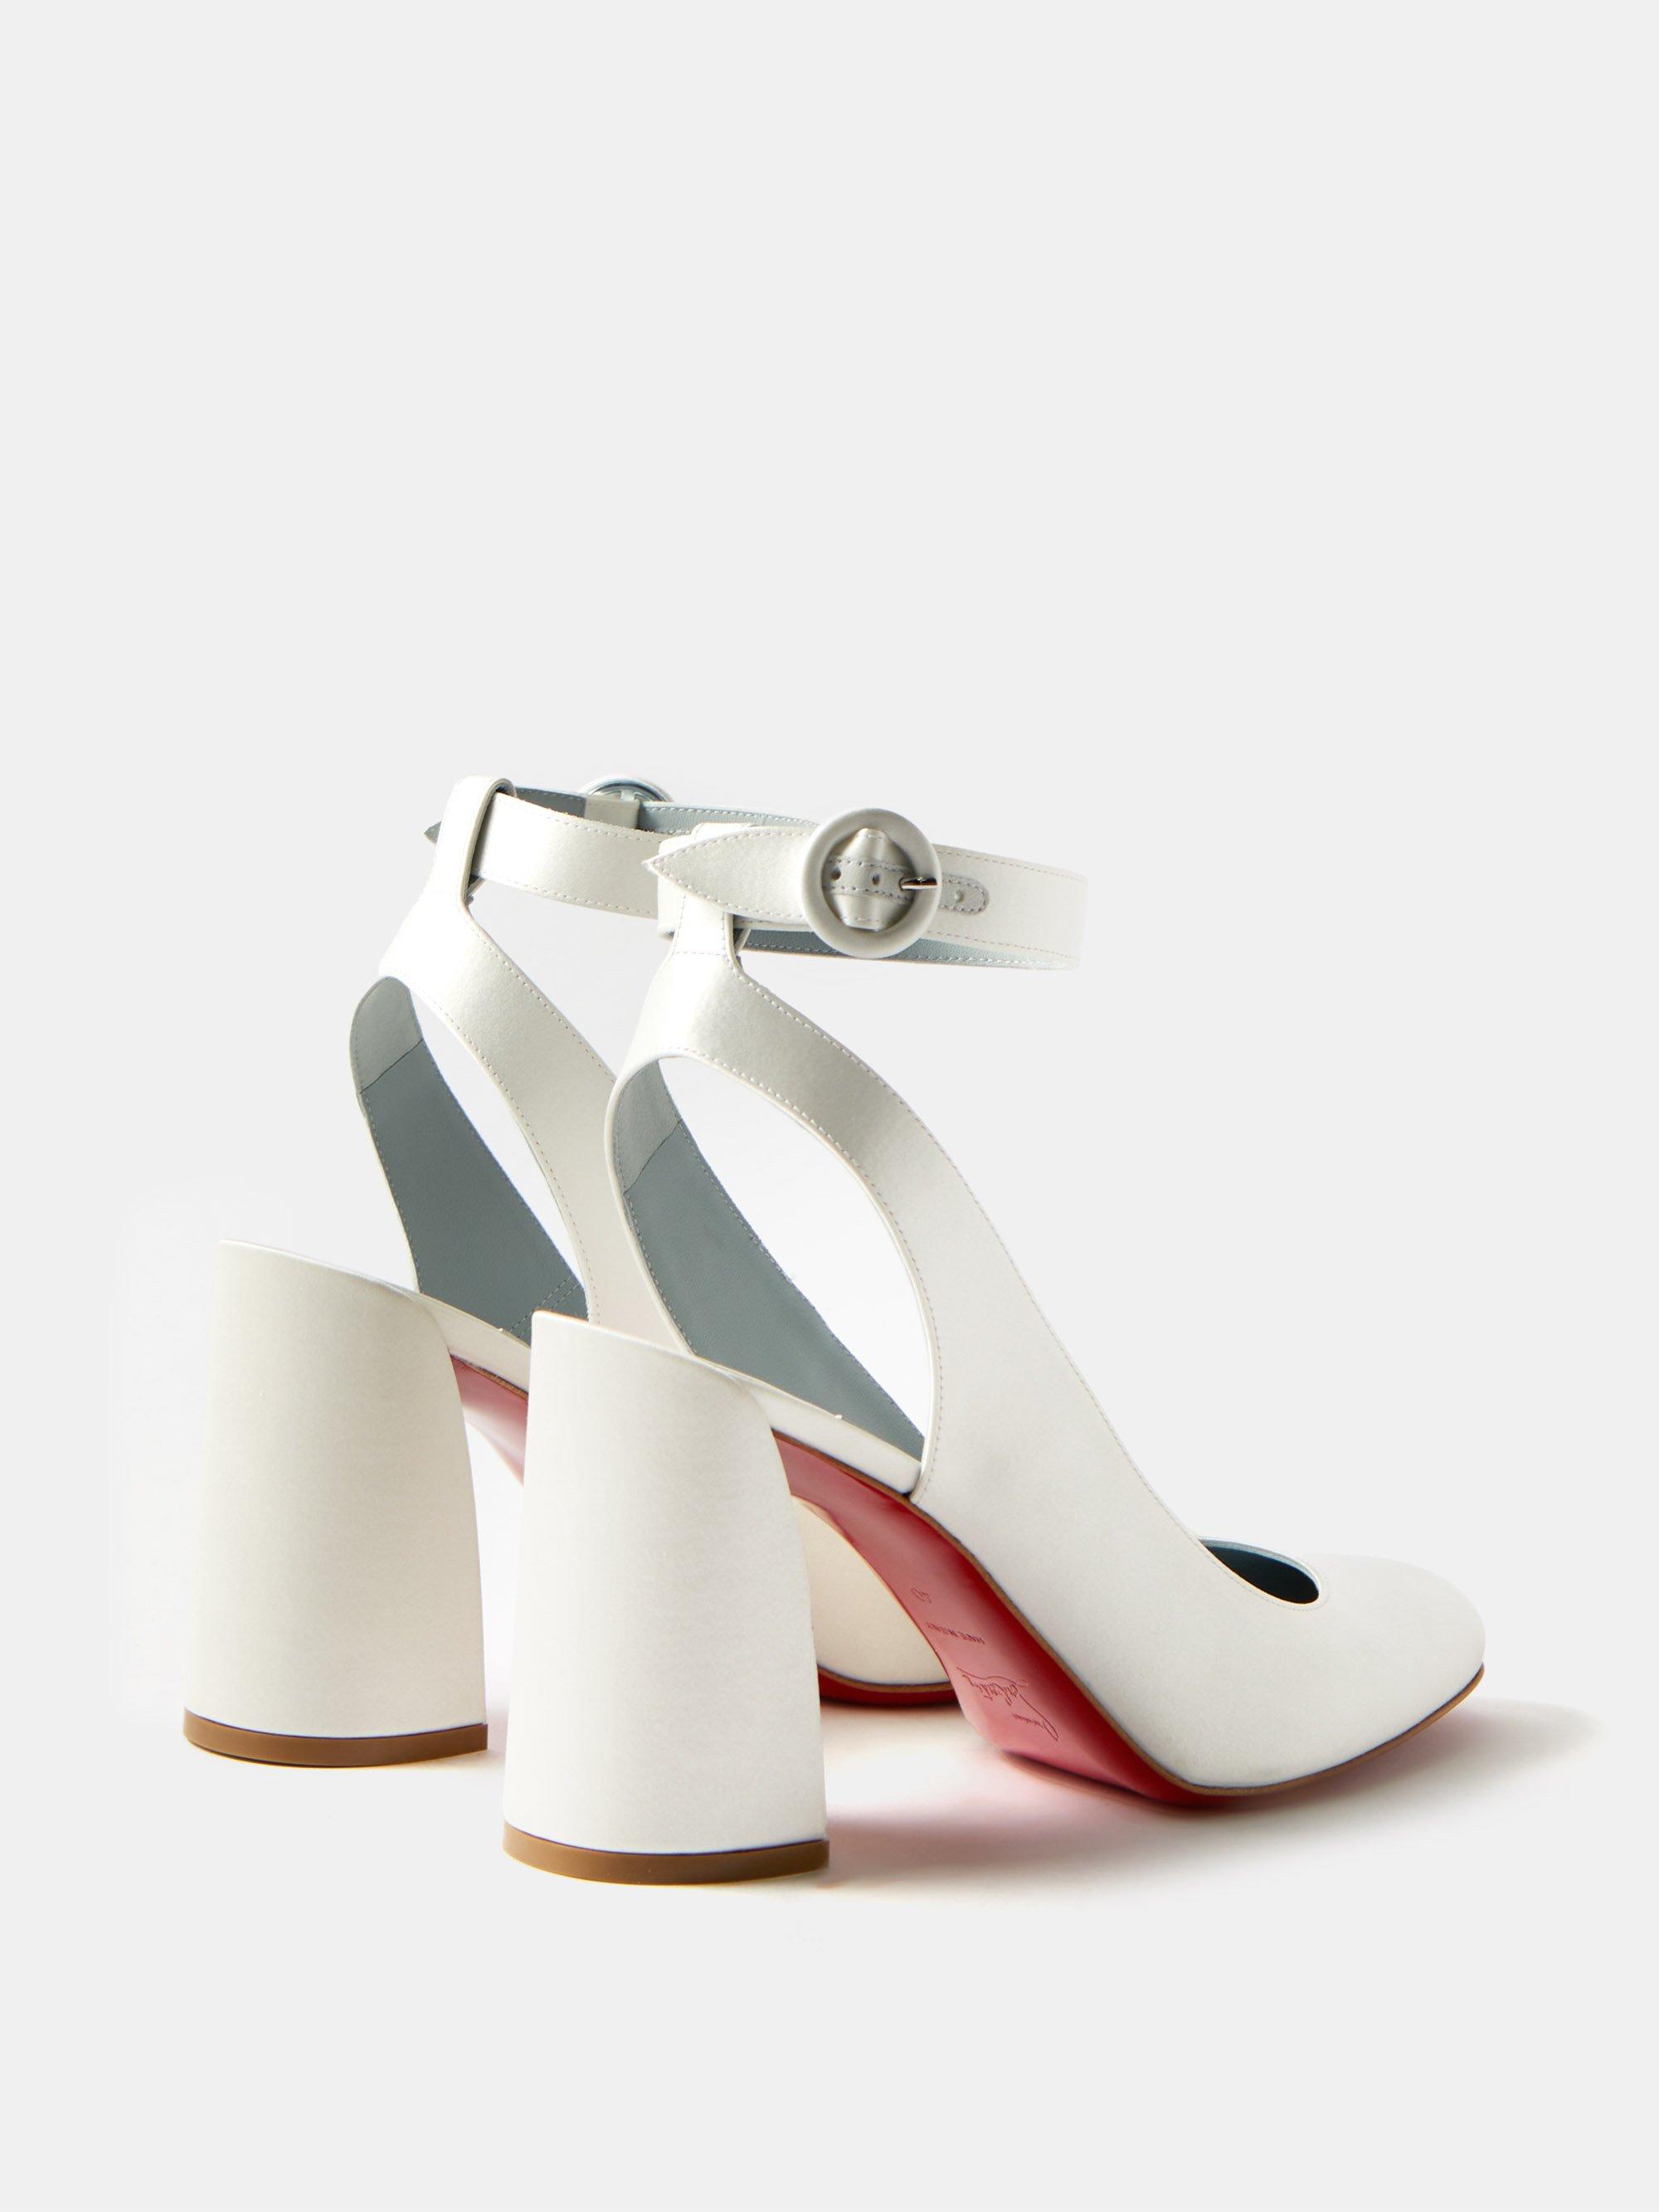 Christian Louboutin Miss Sab Sling 85 Crepe-satin Slingback Pumps in White  | Lyst